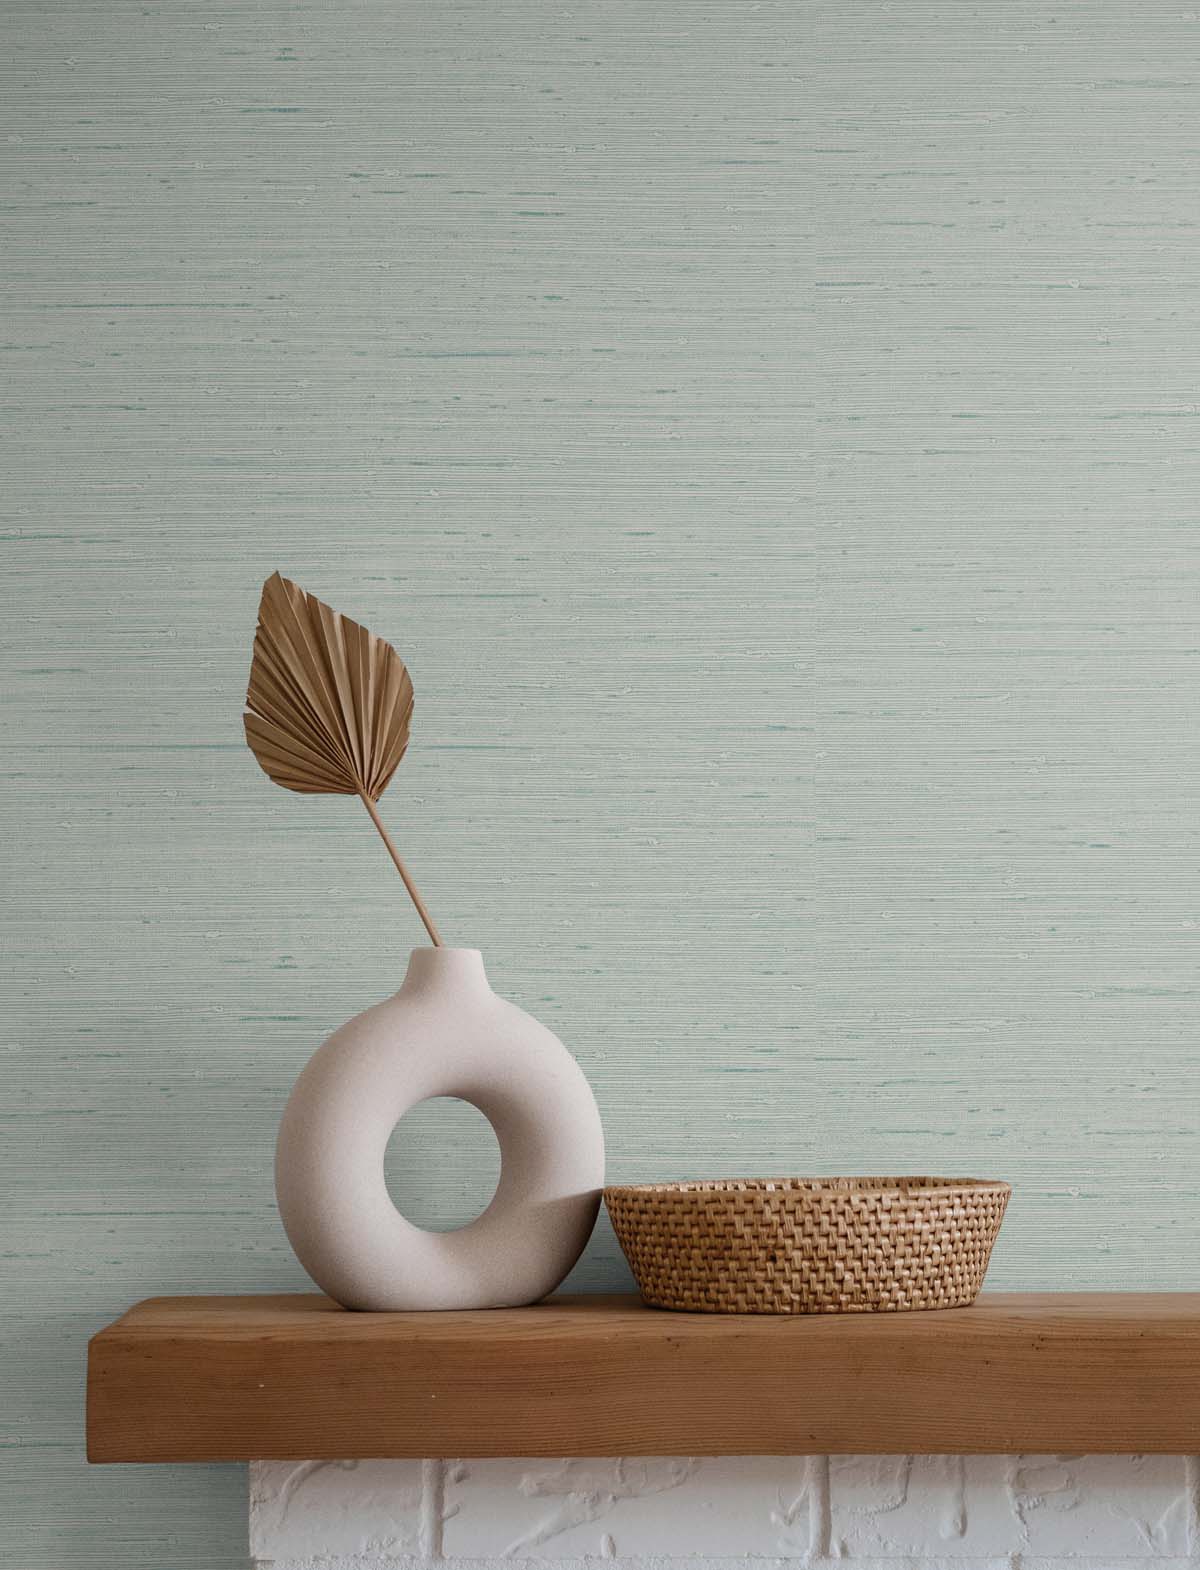 Sea Foam Green Wallpaper with a wicker basket and white vase atop a wooden mantel